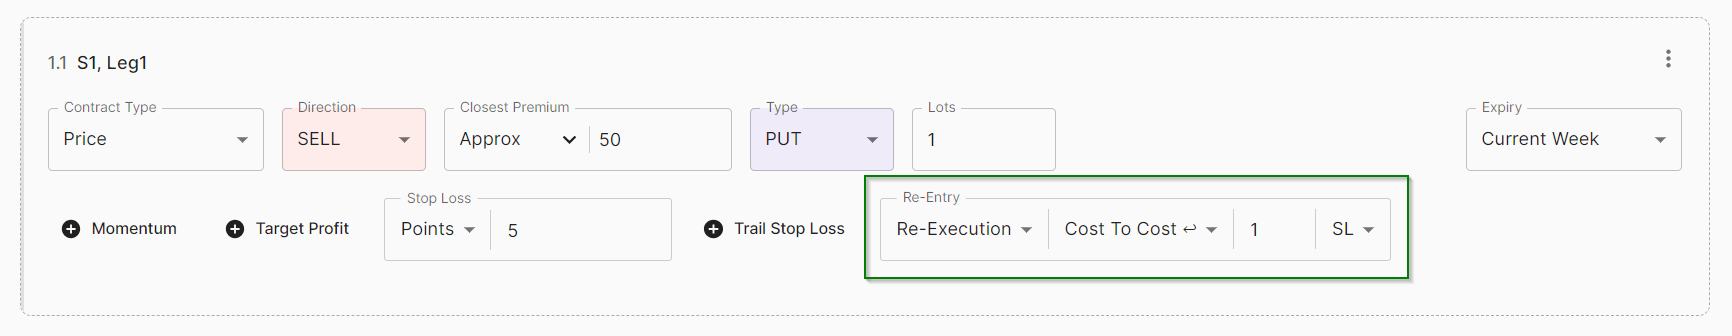 Re-Execution Cost To Cost Reverse